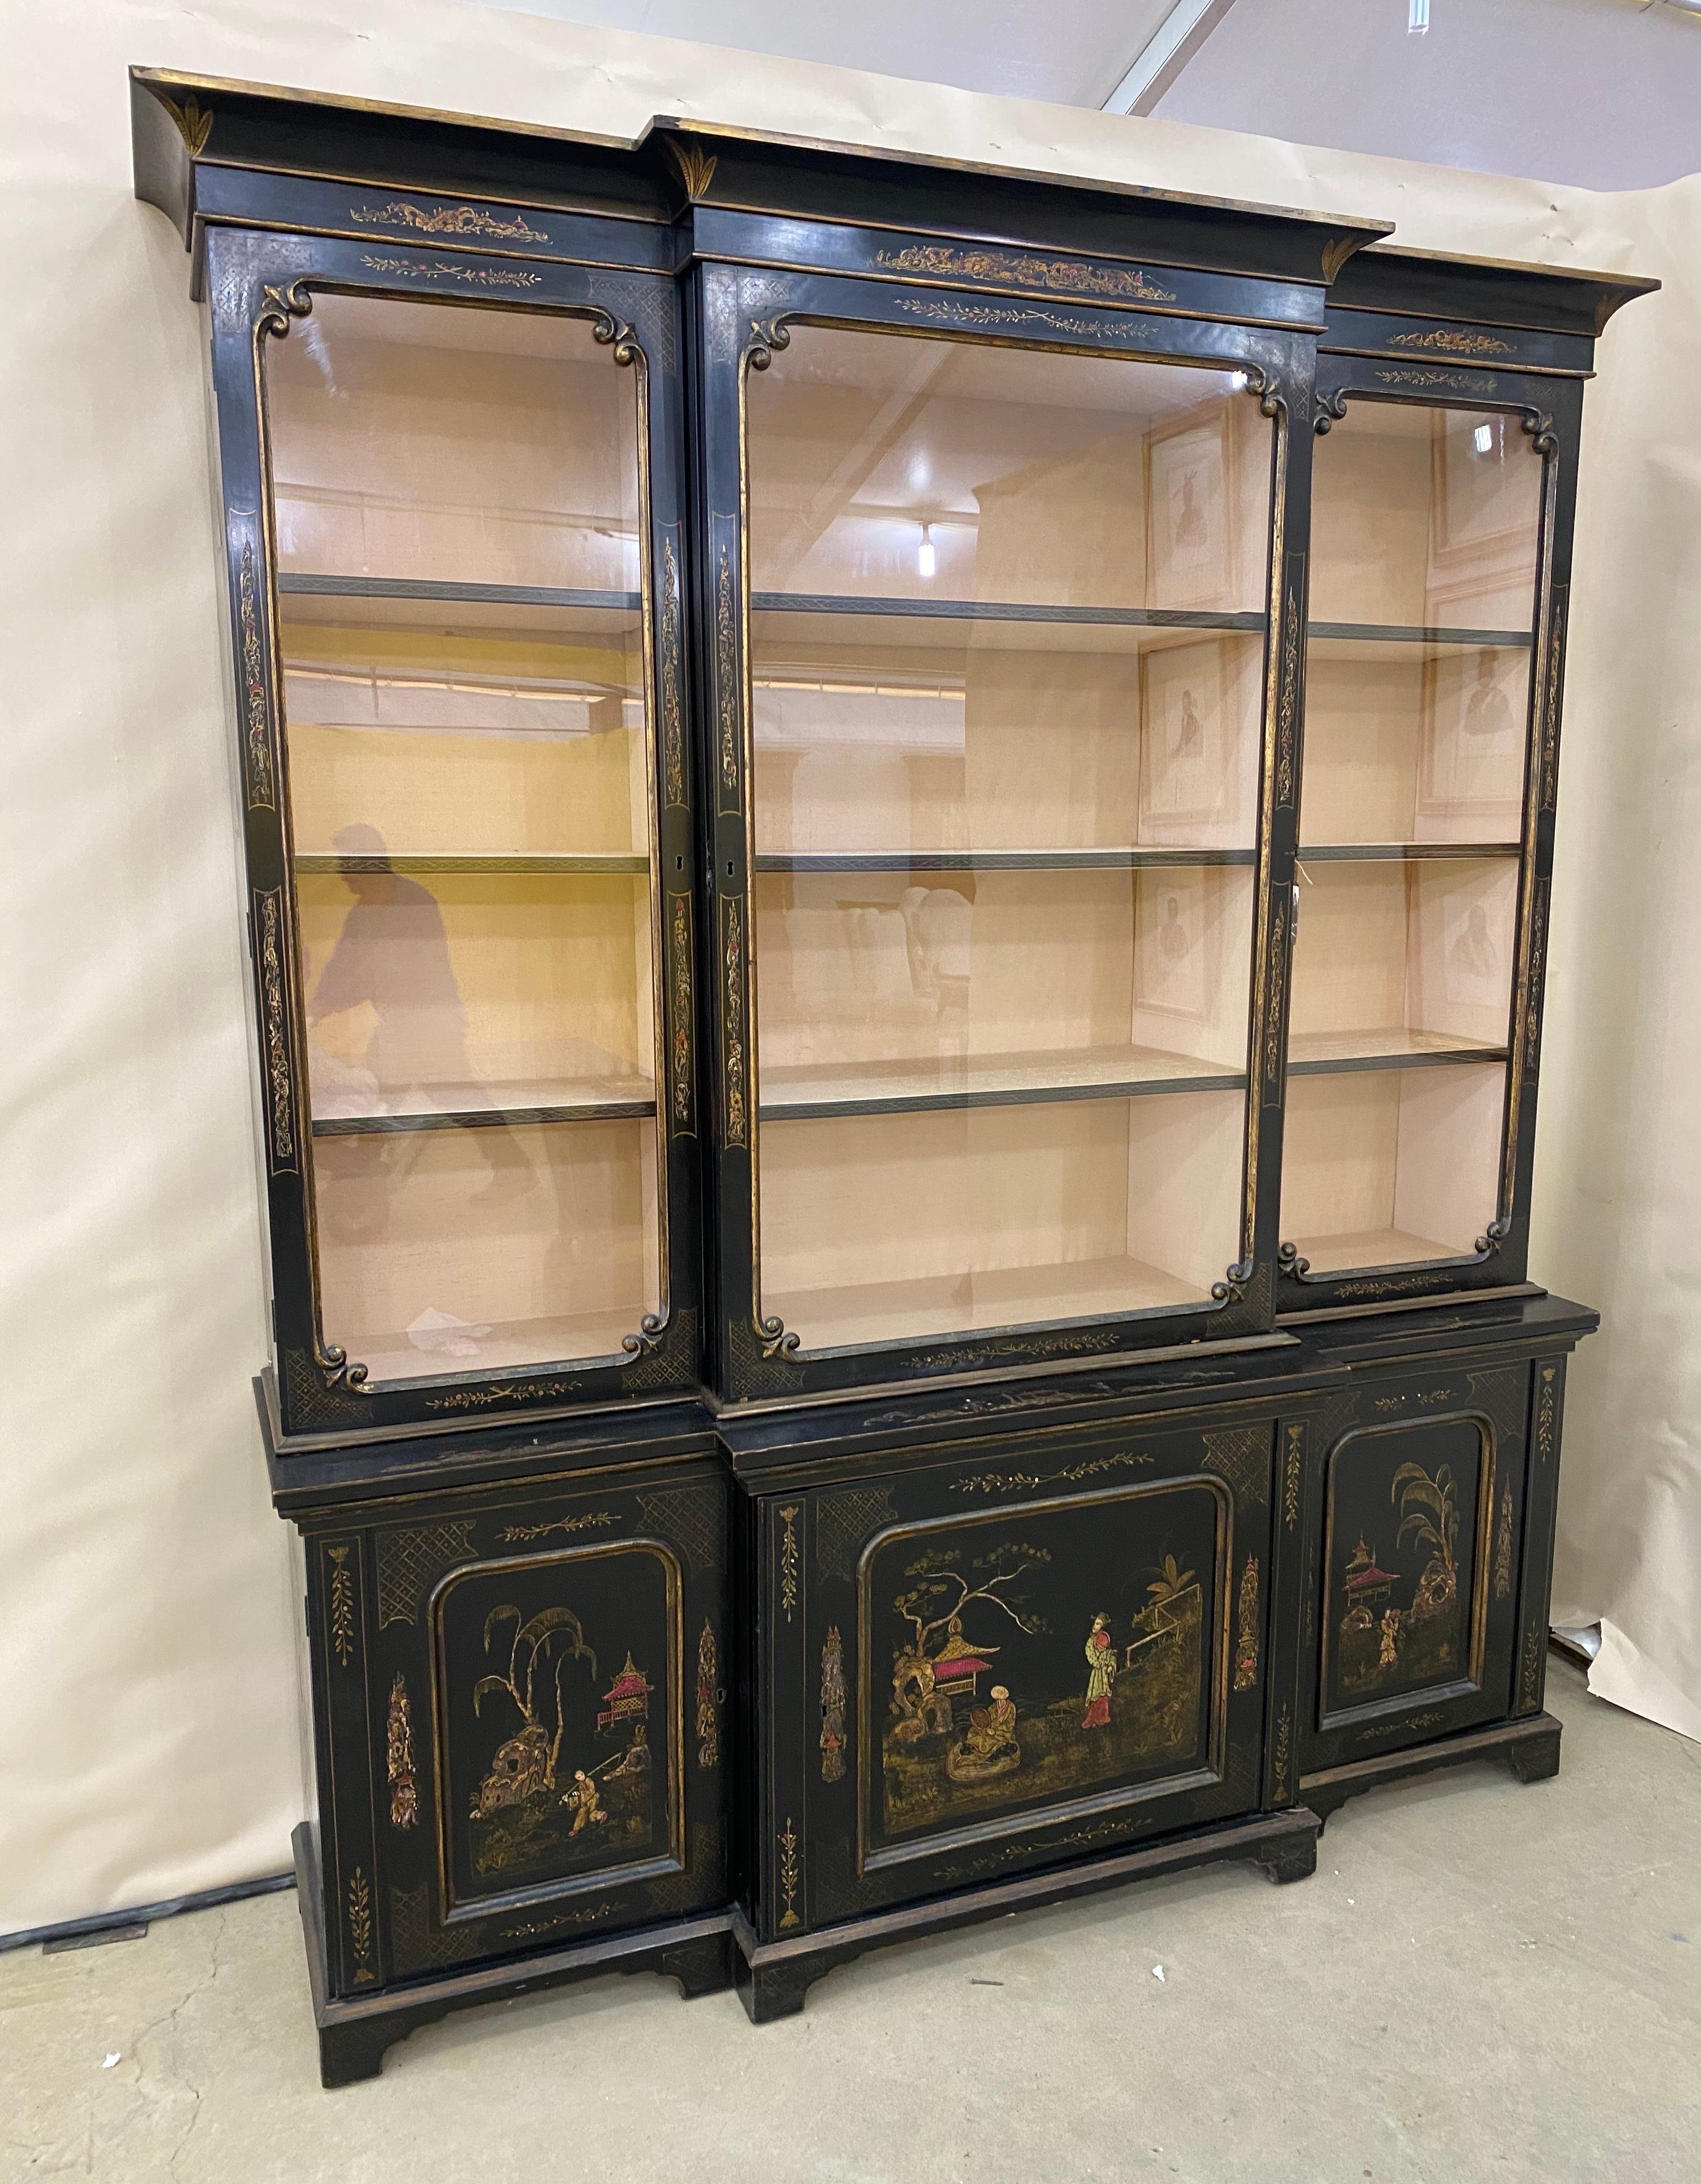 Great 19th century English chinoiserie breakfront china cabinet or bookcase- 2 part cabinet with single center door for more unobstructed view. Chinoiserie decoration on both top and bottom cabinets, sides included.